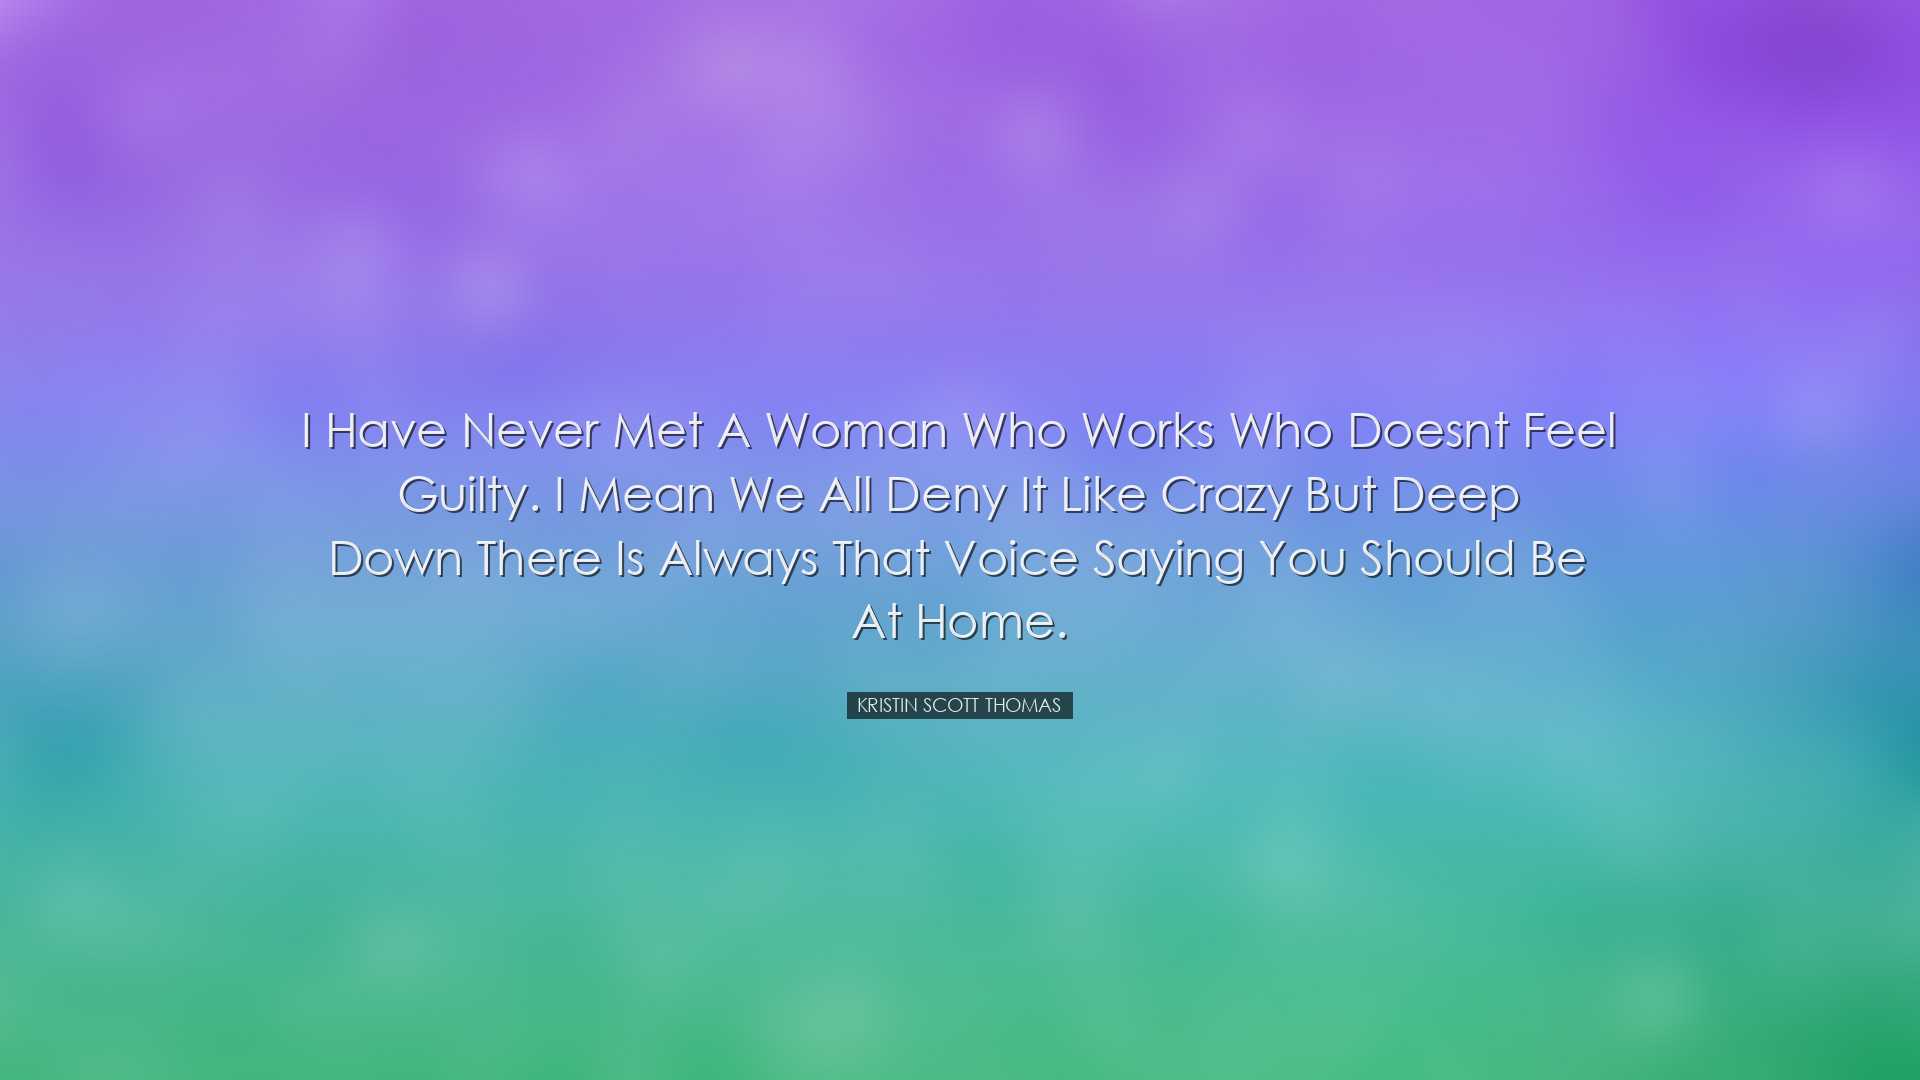 I have never met a woman who works who doesnt feel guilty. I mean